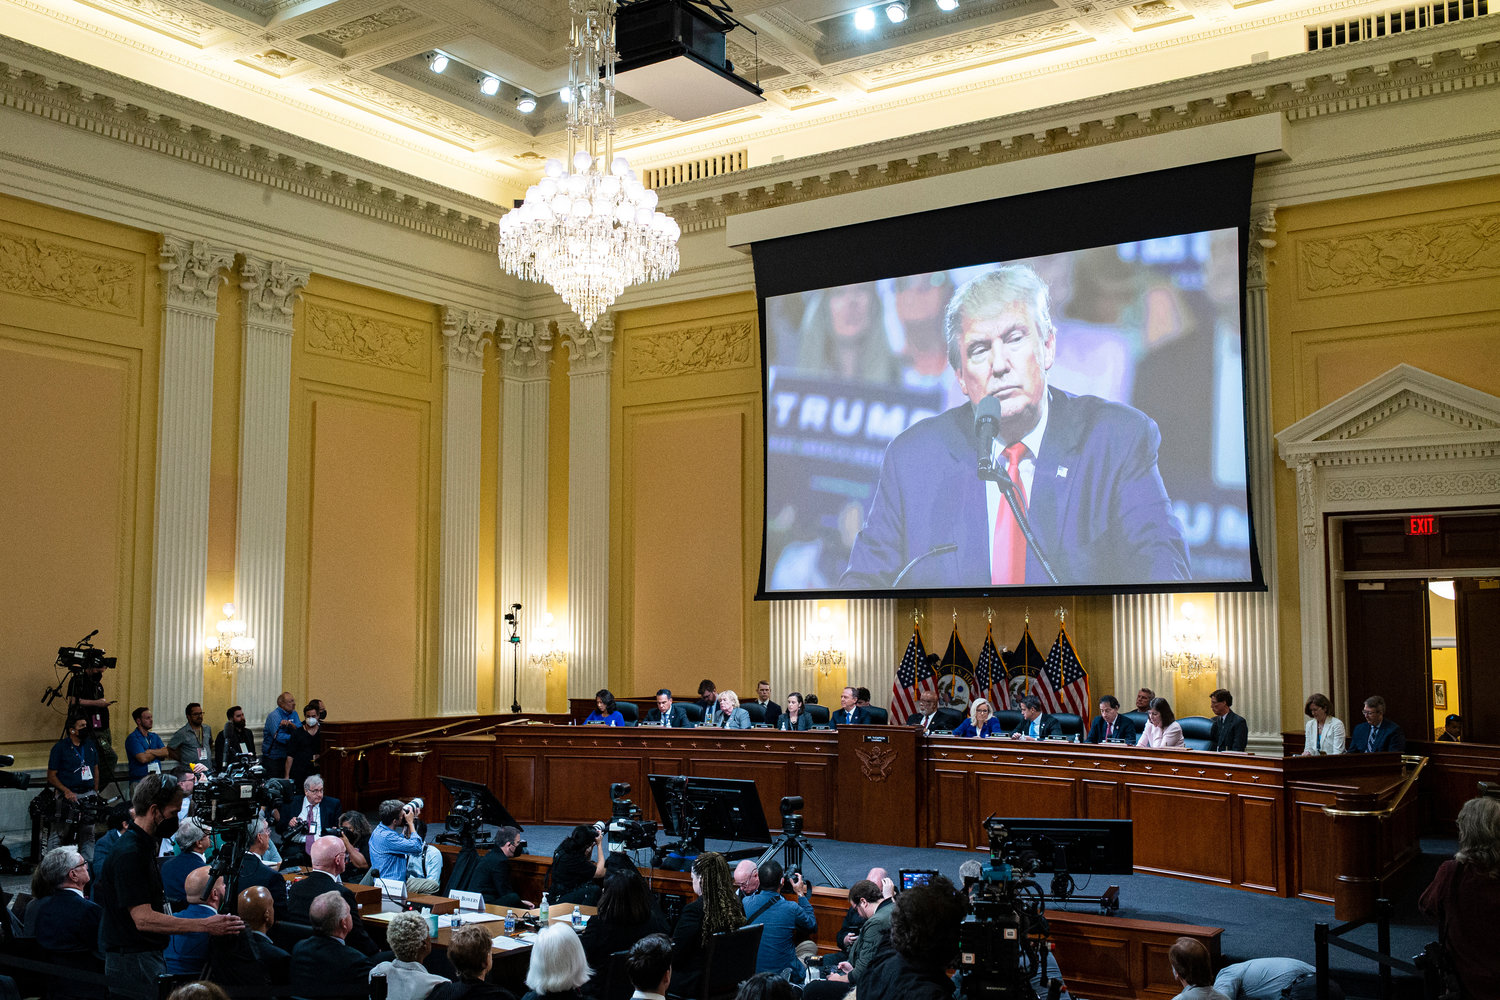 An image of former President Donald Trump is displayed as the House select committee investigating the Jan. 6 attack on the U.S. Capitol continues to reveal its findings of a year-long investigation, at the Capitol in Washington, Tuesday, June 21, 2022. On June 23, the Jan. 6 committee will hear from former Justice Department officials who faced down a relentless pressure campaign from Donald Trump over the presidential election results. (Al Drago/Pool Photo via AP)